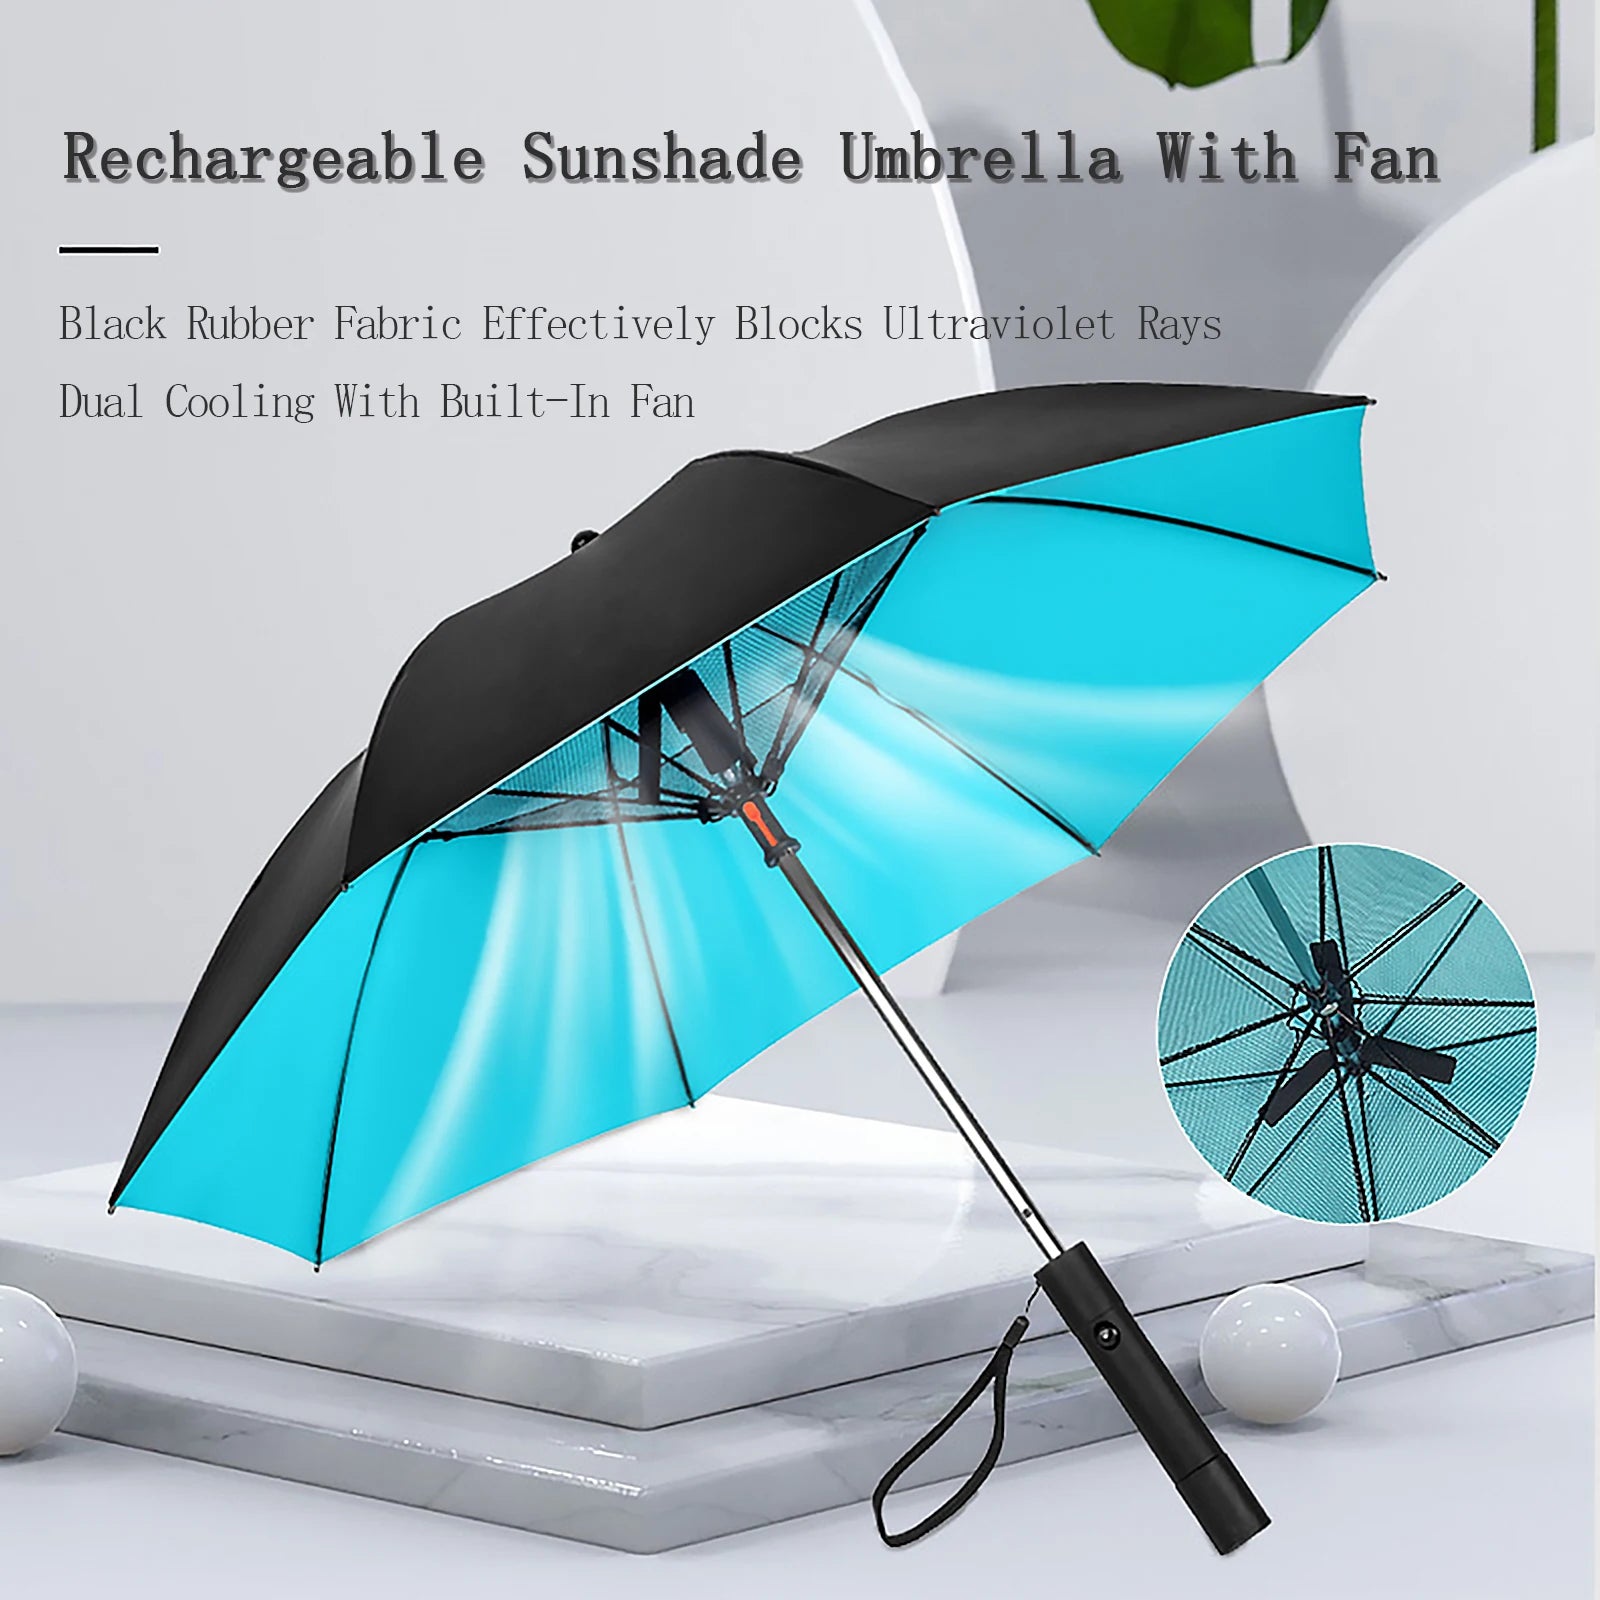 Rechargeable black and turquoise umbrella with built-in fan, UV protection, and dual cooling system for outdoor use.